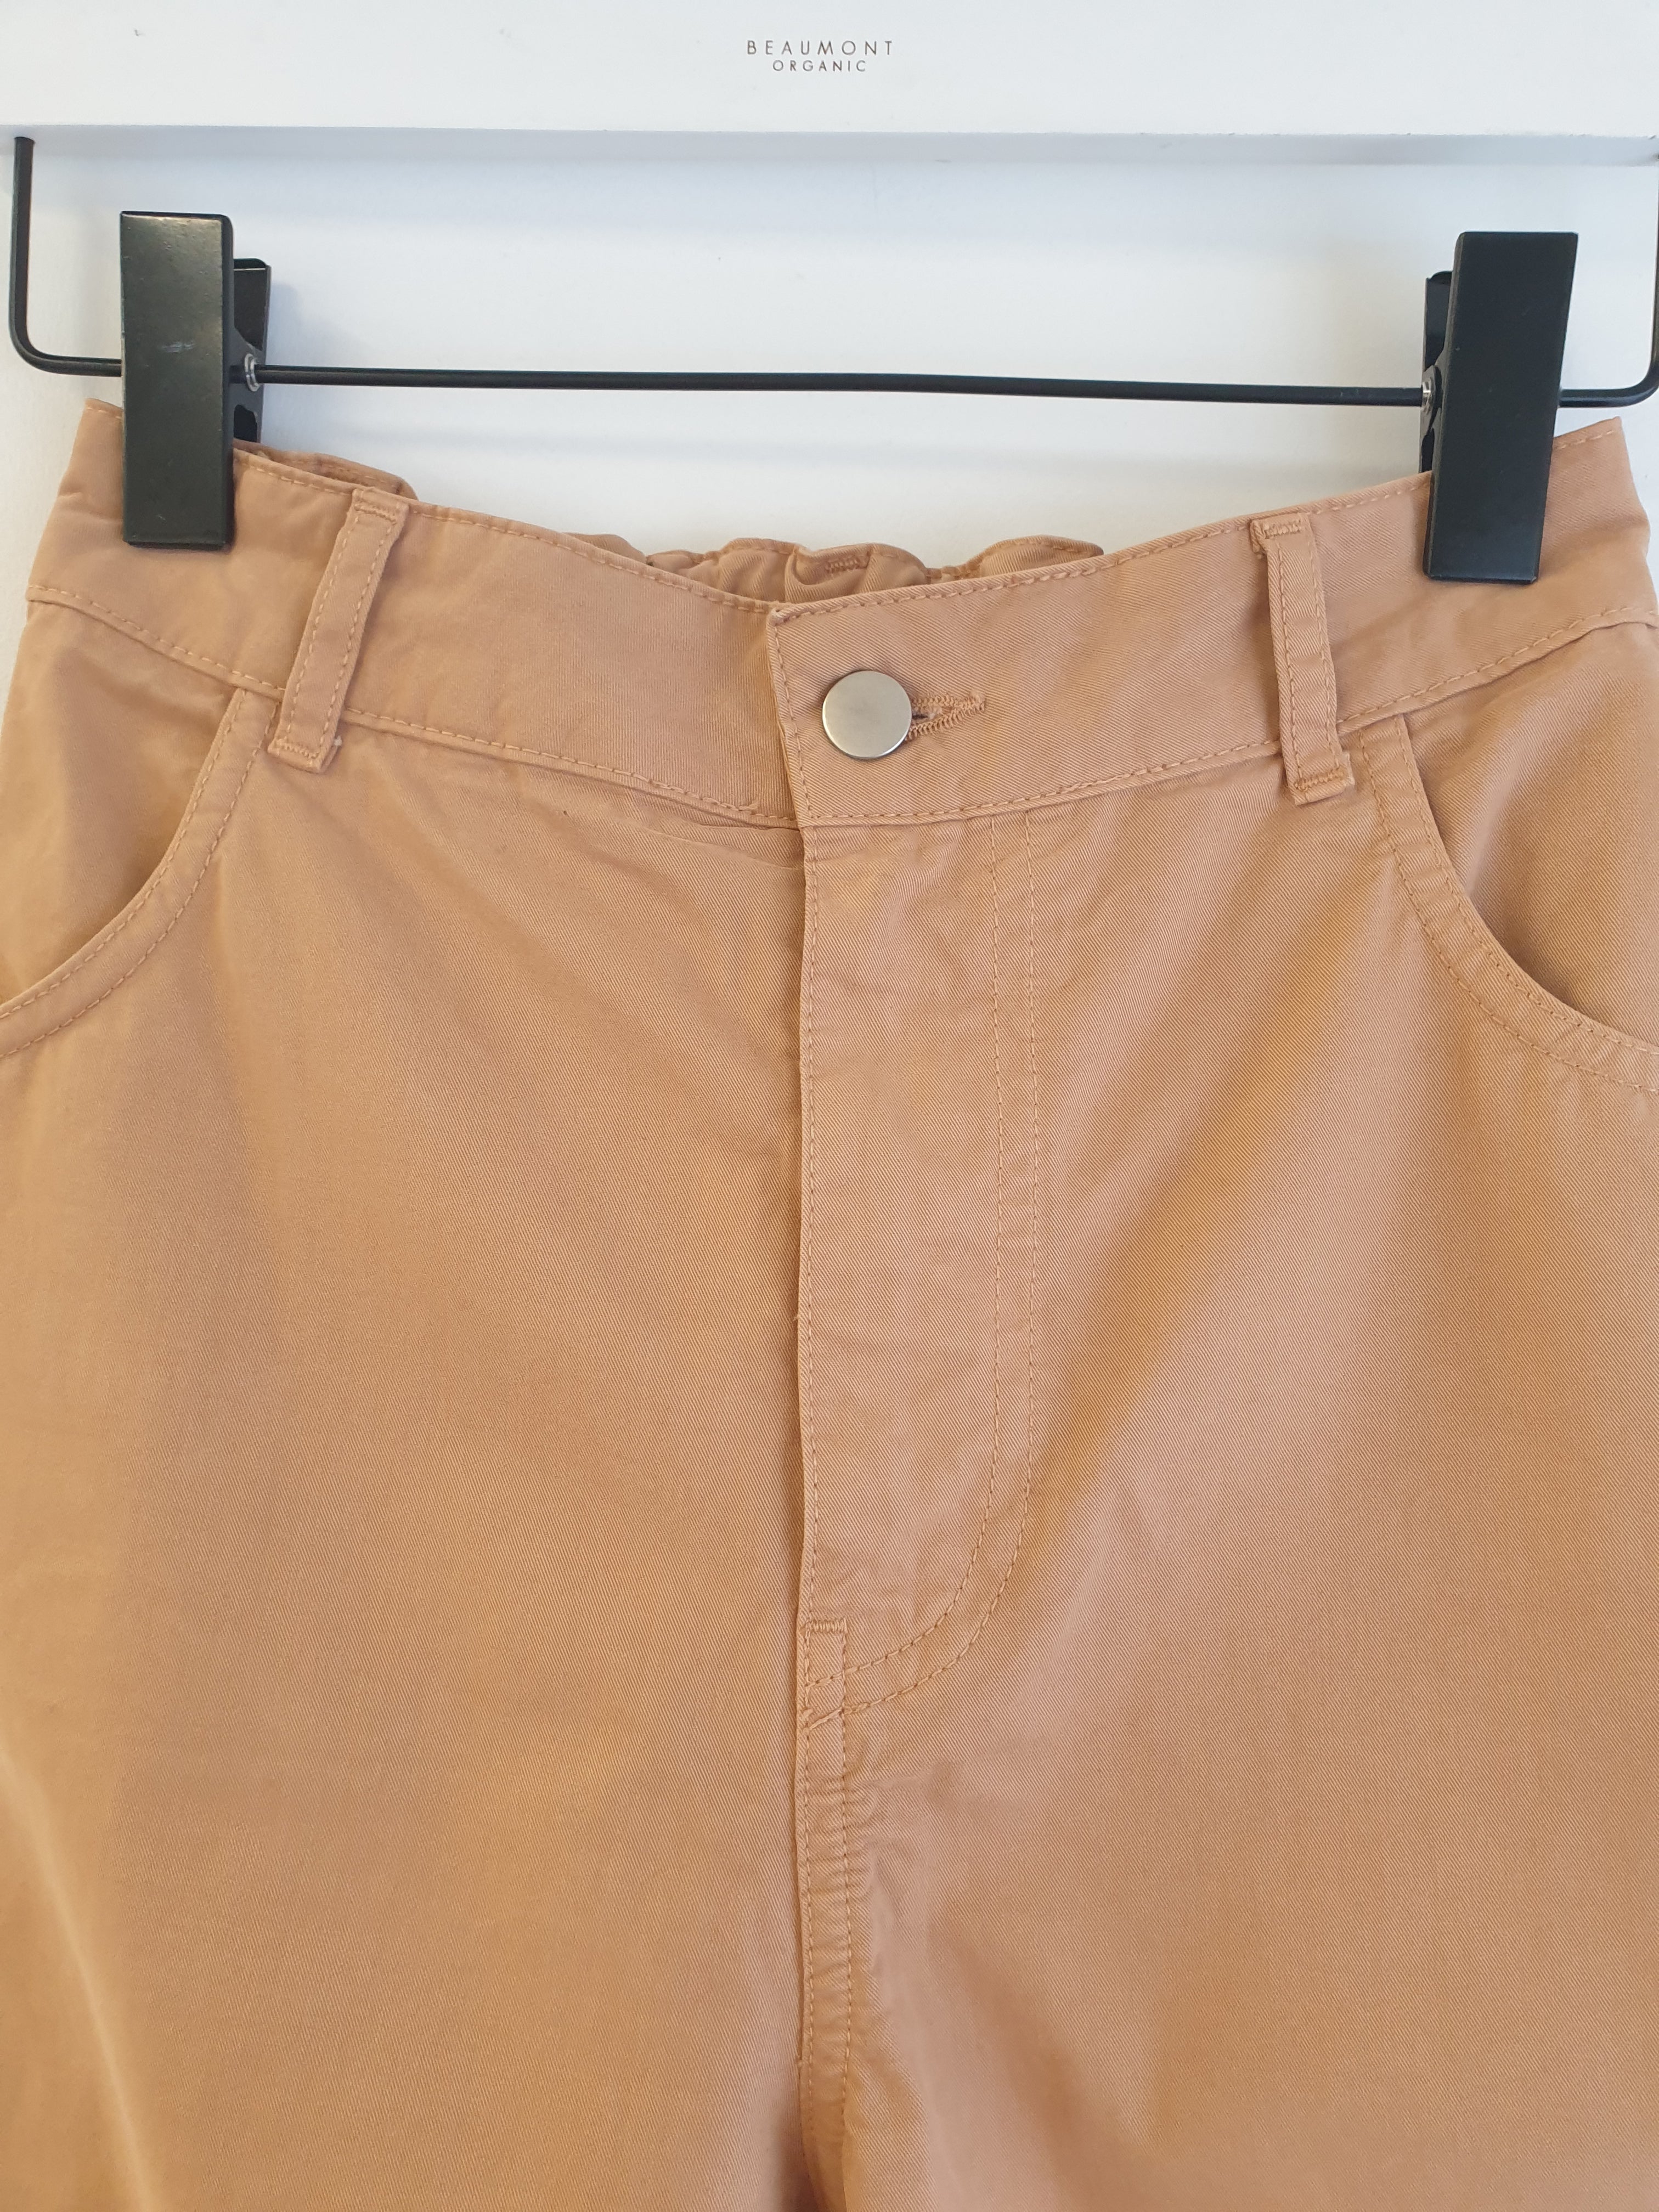 Tessa Trousers in Camel Size S